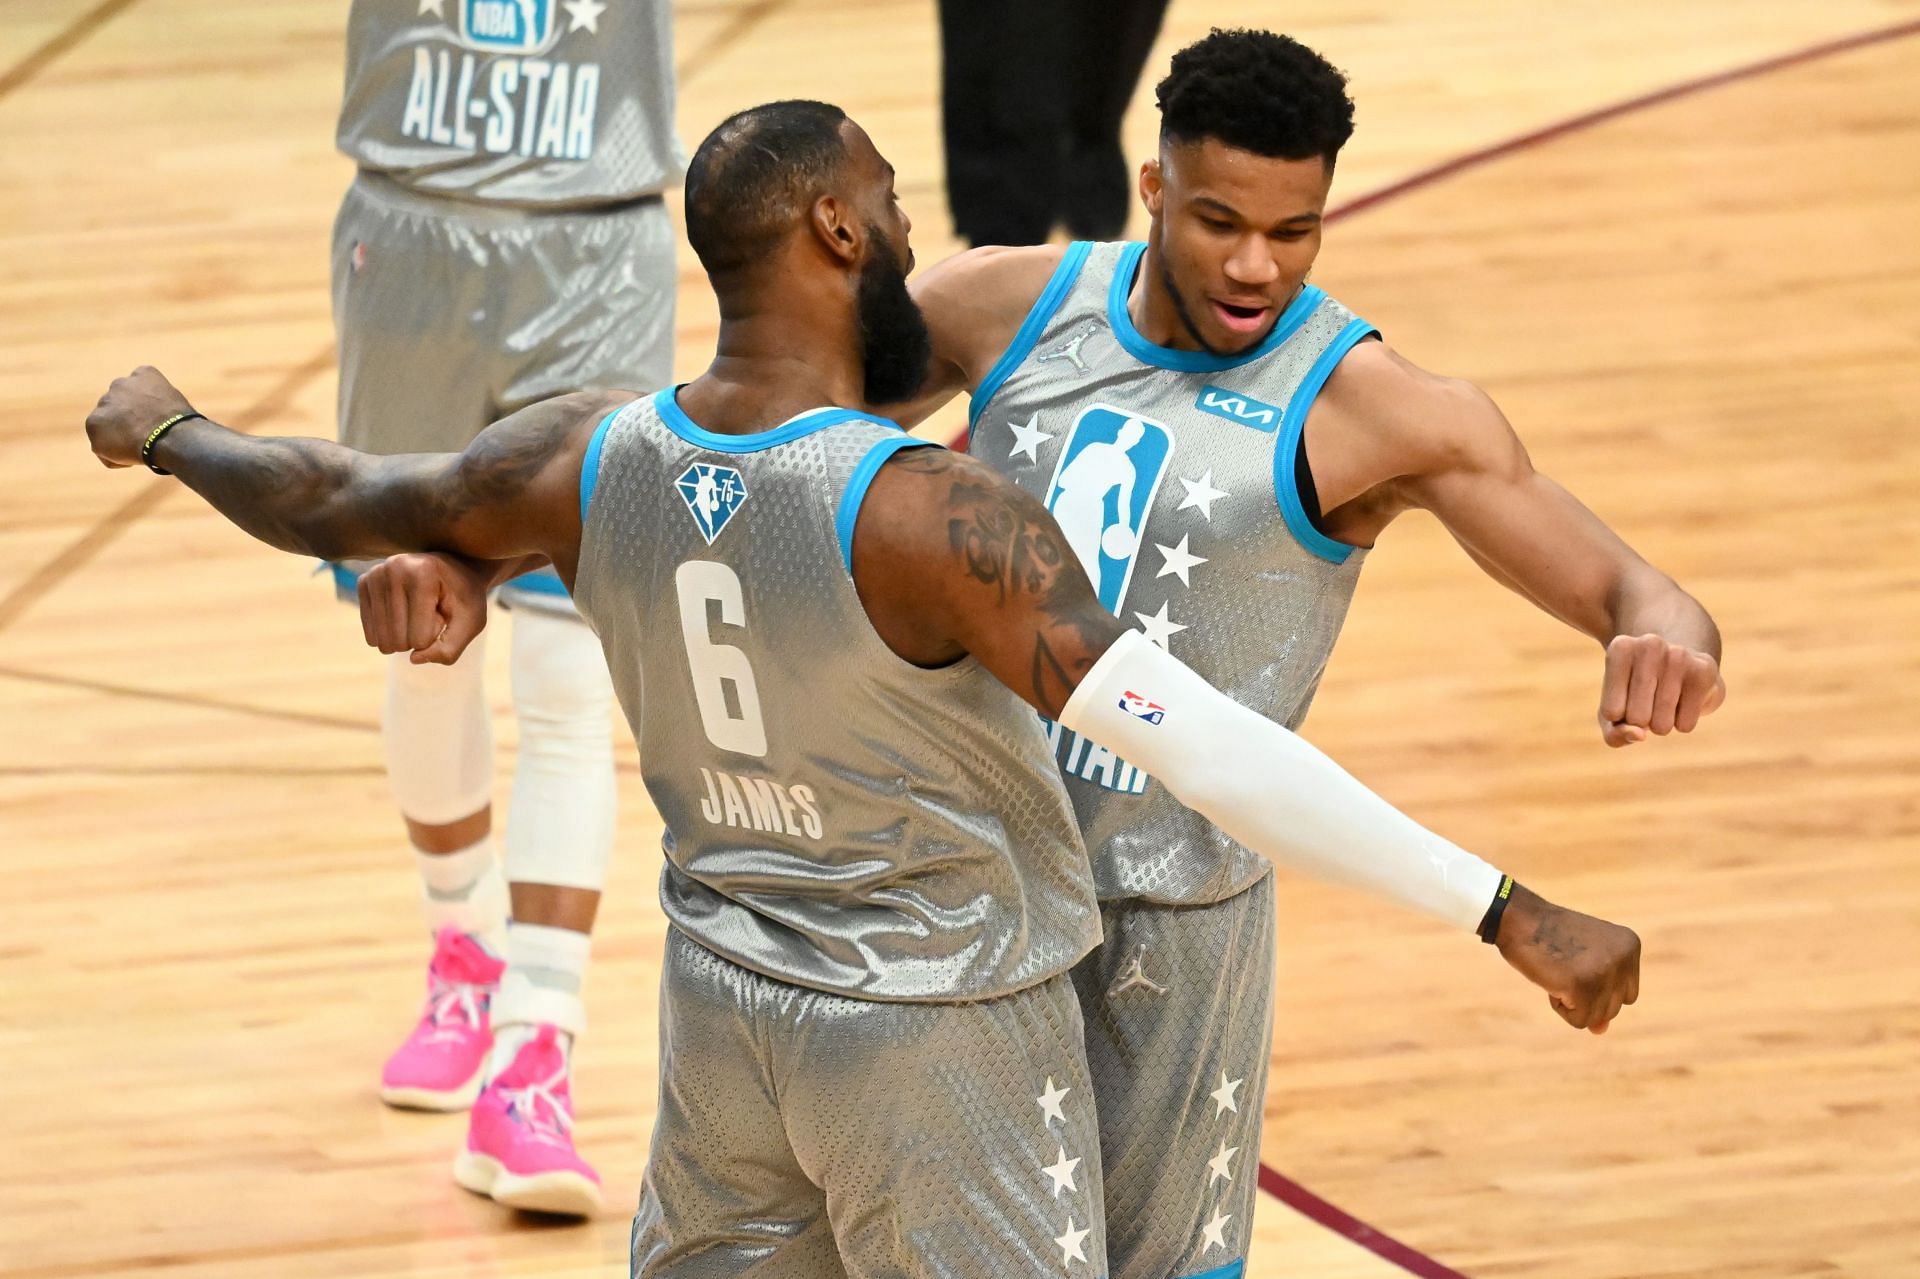 LeBron James #6 and Giannis Antetokounmpo #34 of Team LeBron celebrate after defeating Team Durant 163-160 in the 2022 NBA All-Star Game at Rocket Mortgage Fieldhouse in Cleveland, Ohio.